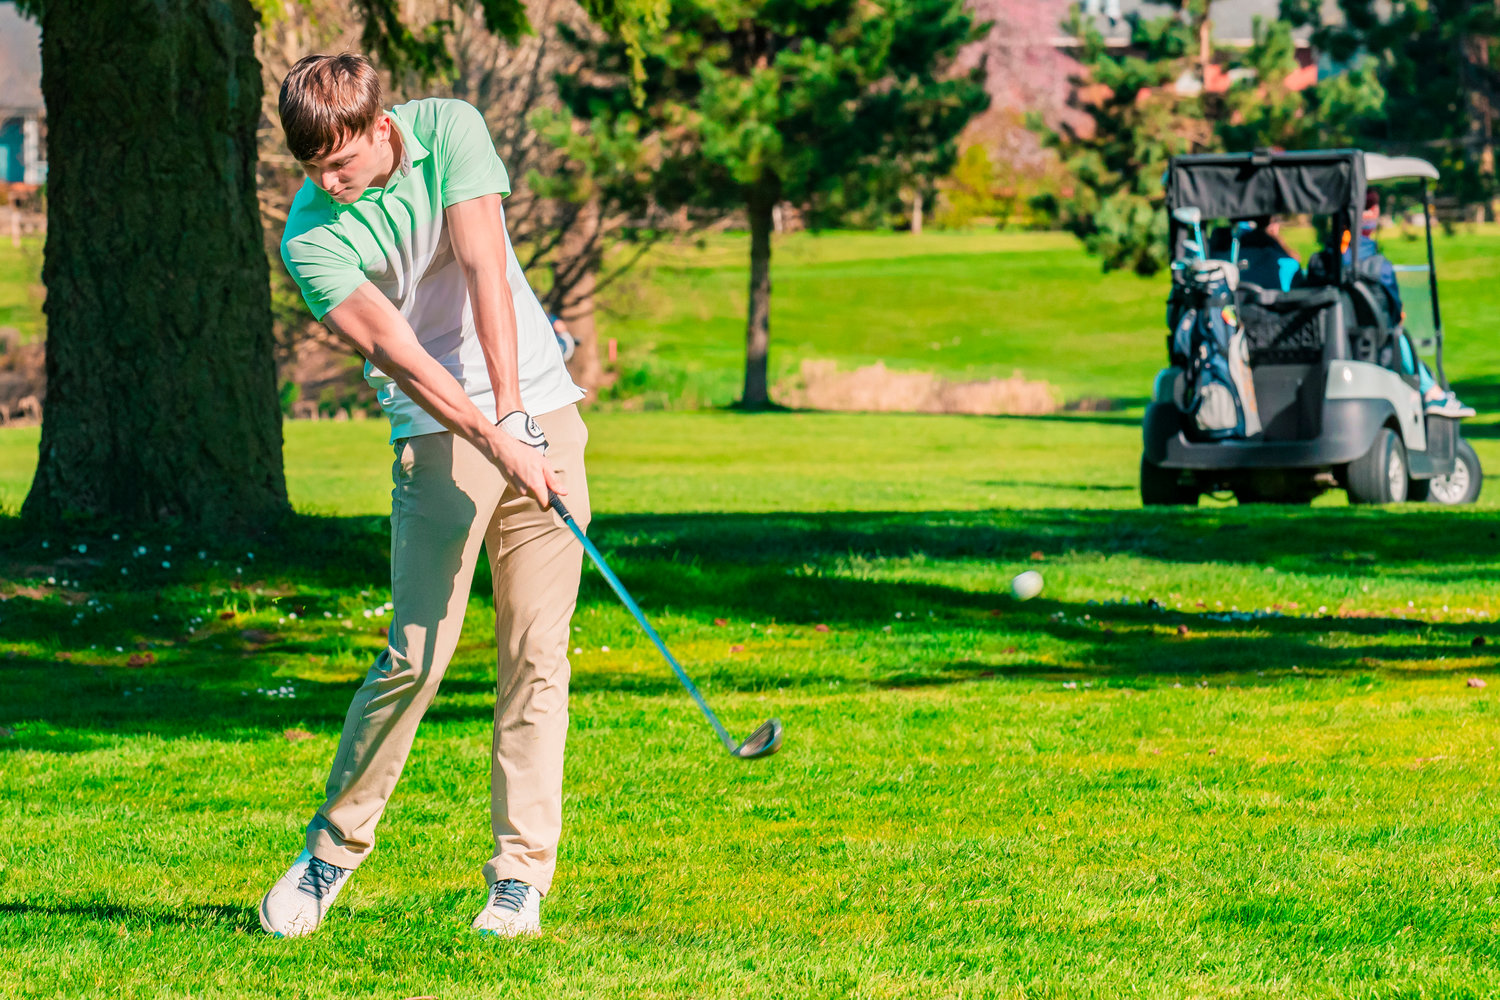 Adna’s Chase Collins makes contact at Riverside Golf Course in Chehalis on Monday.